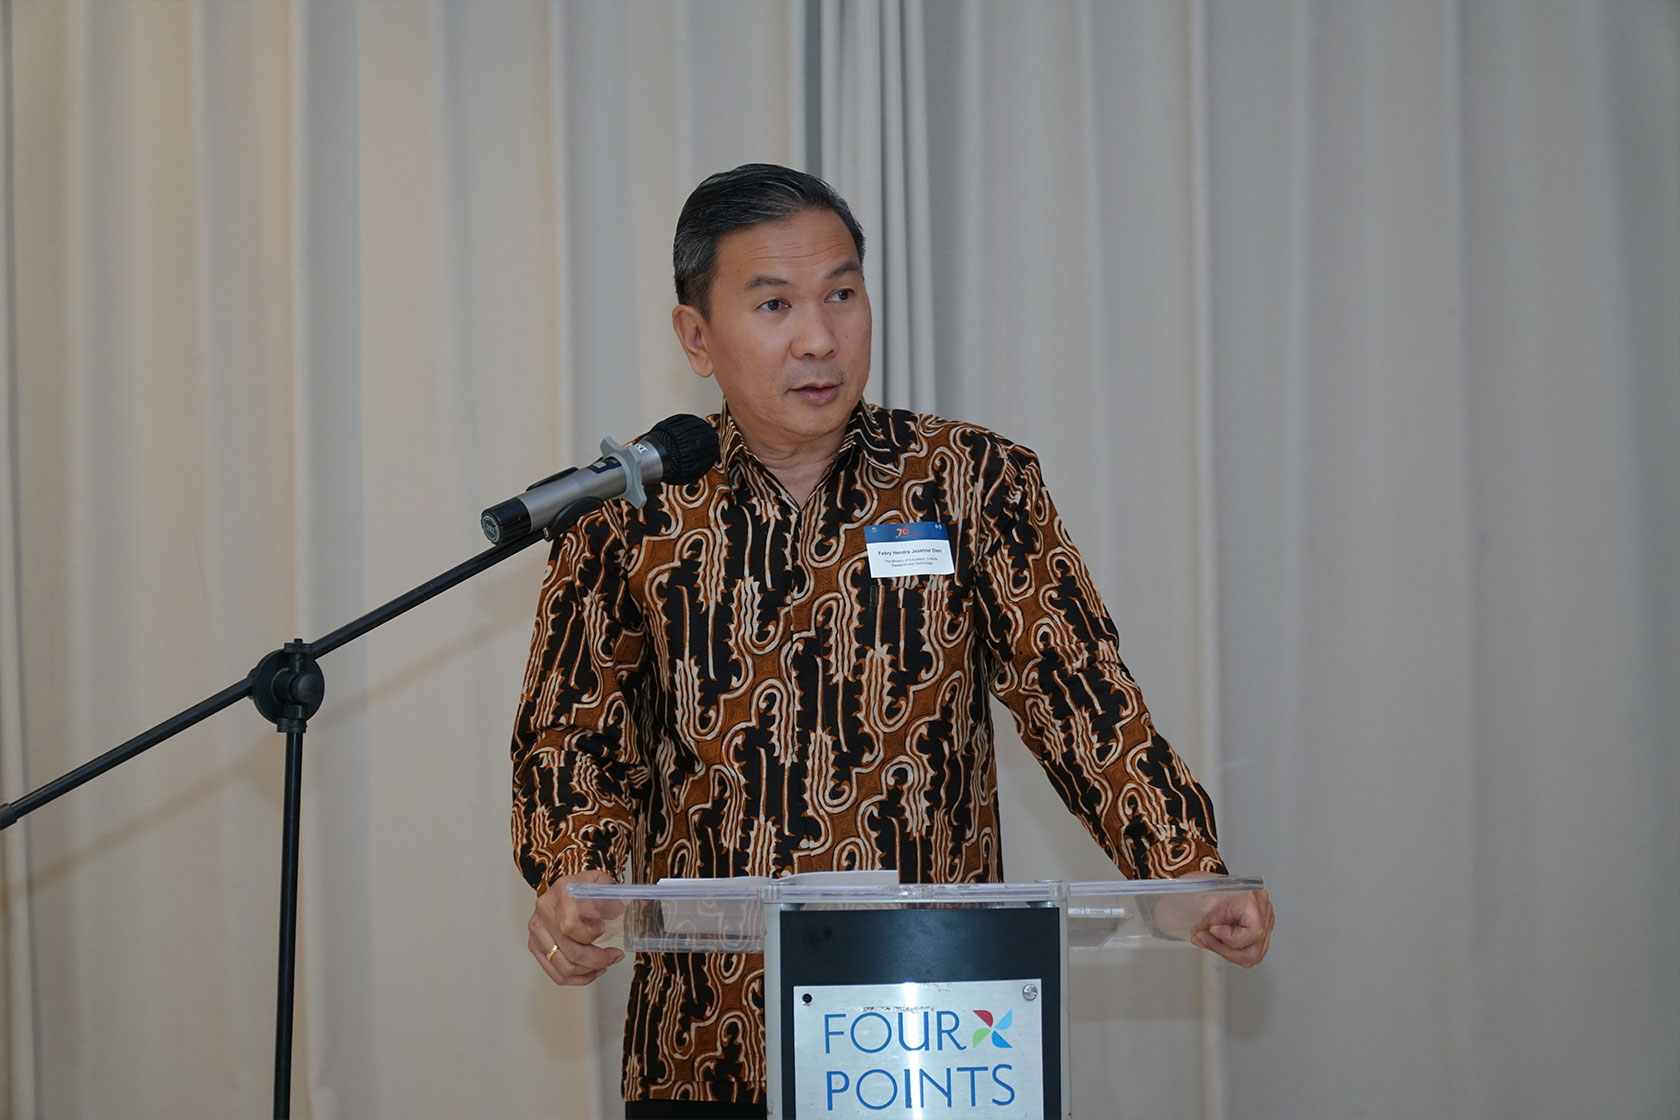 Mr Febry HJ Dien, a distinguished alumnus and a secretary of IKAMA North Sulawesi, gives a warm remark, creating a positive and welcoming atmosphere for everyone present.